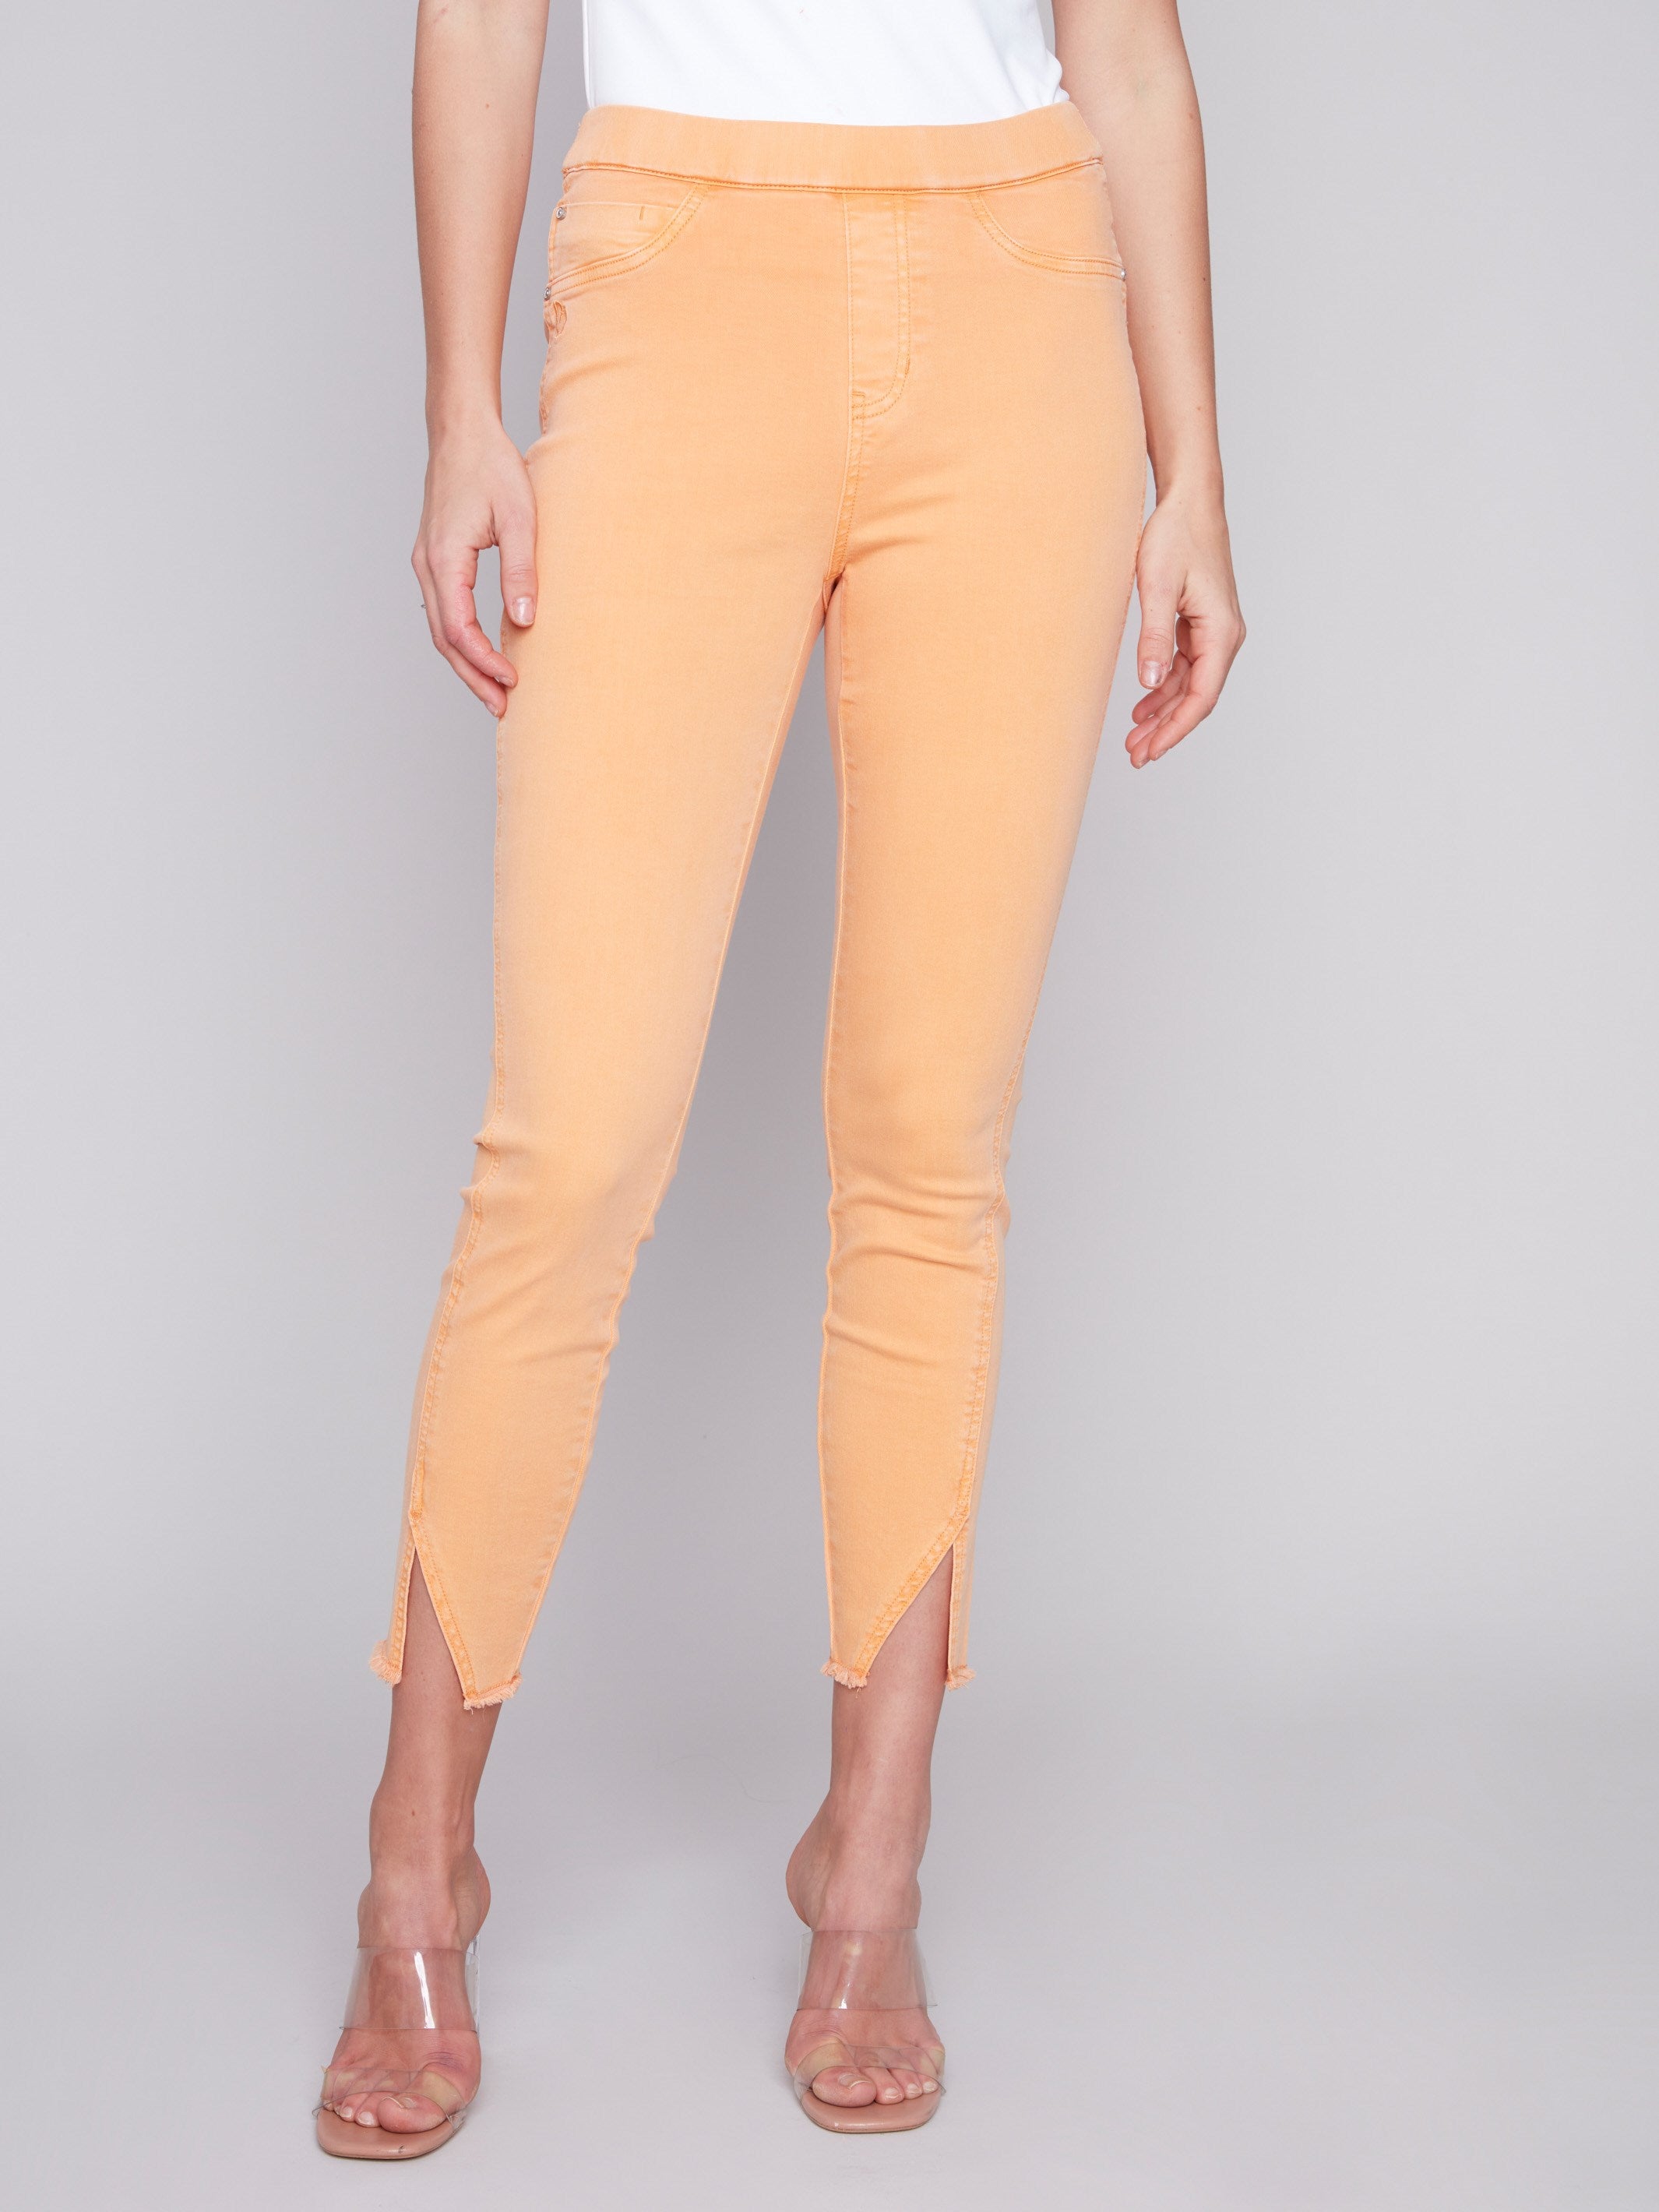 Pull-On Twill Pants with Split Hem - Melon - Charlie B Collection Canada - Image 2